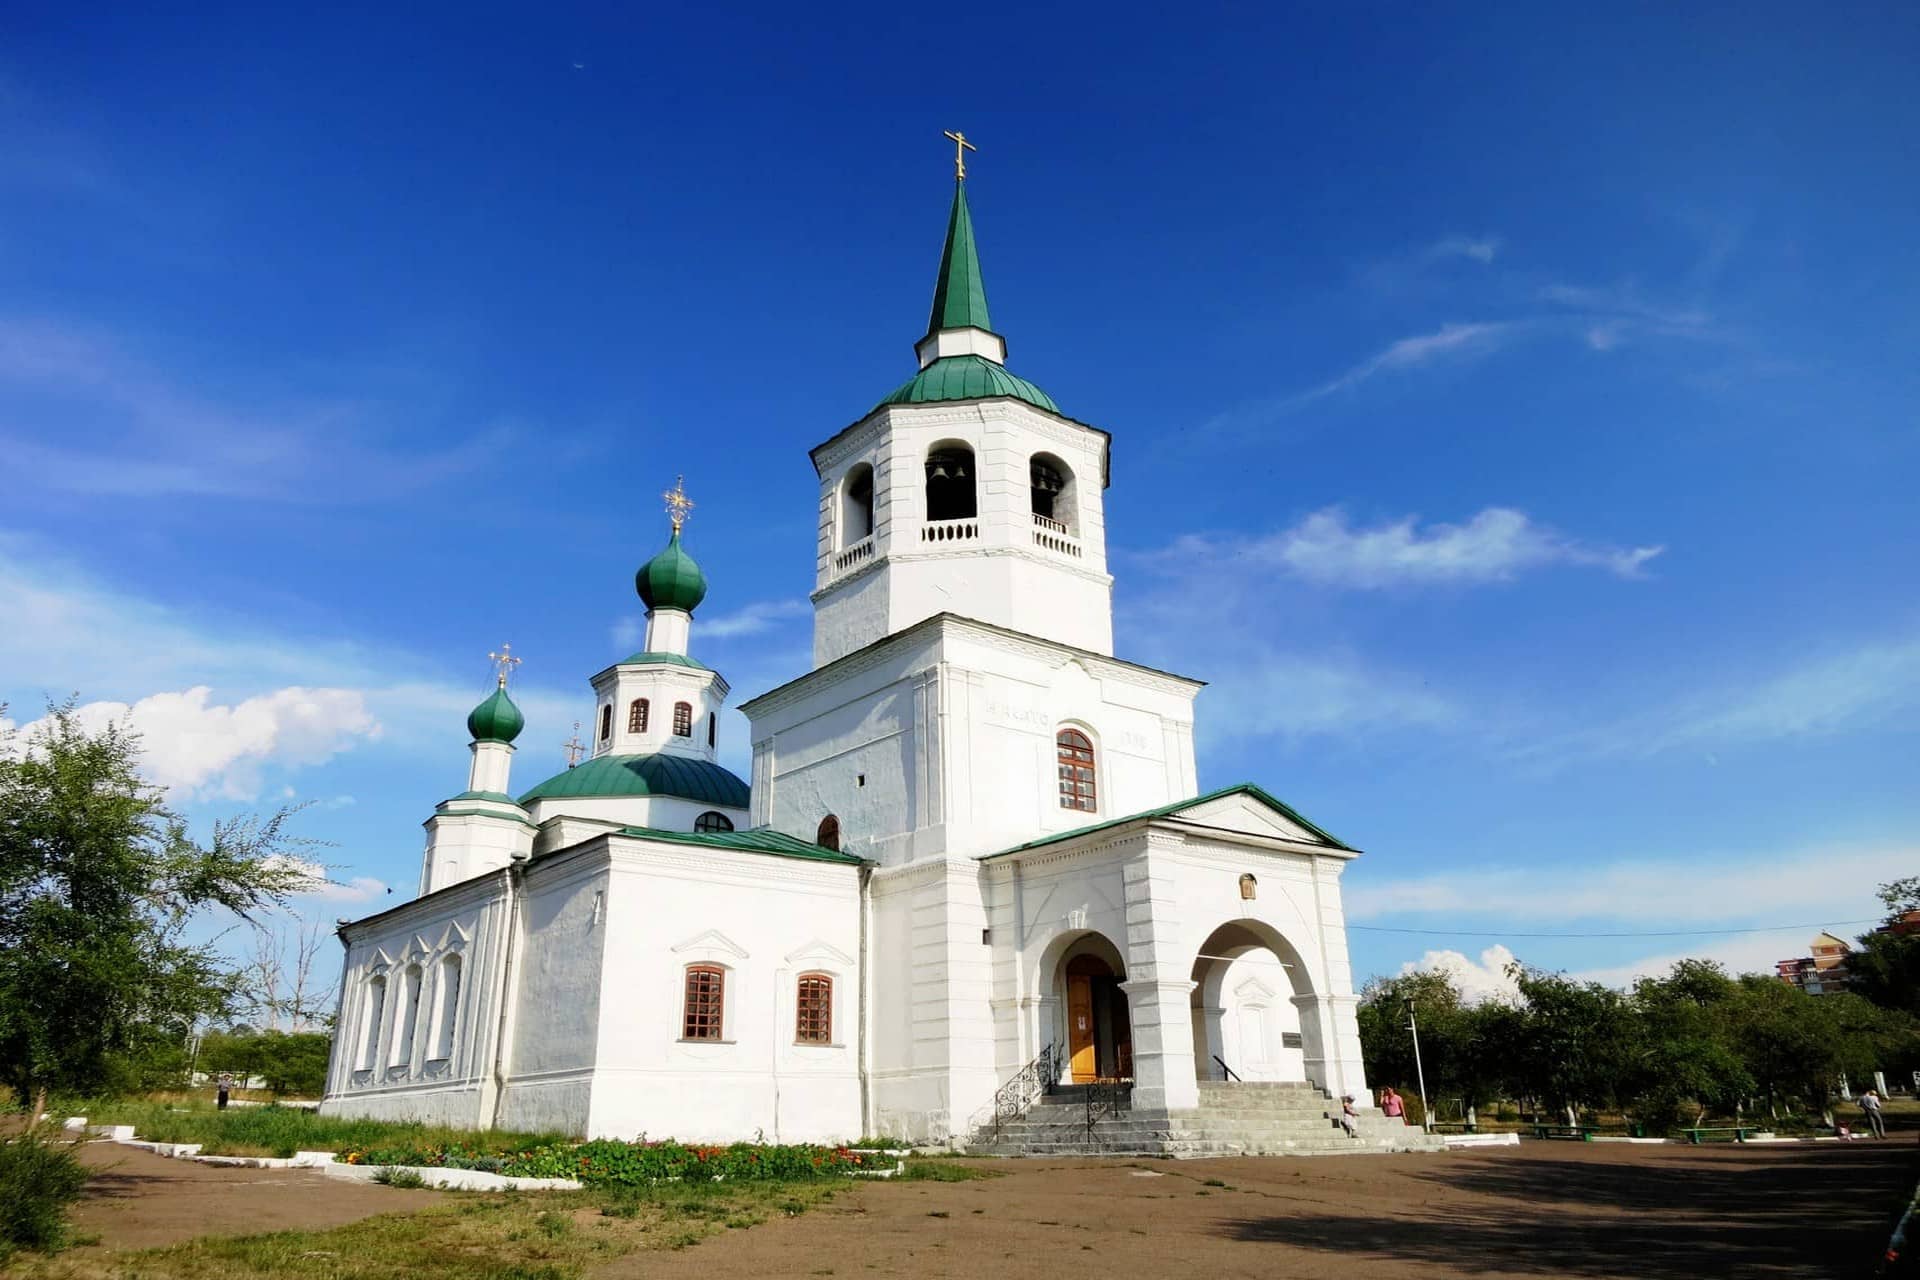 A white Orthodox Church with green domes